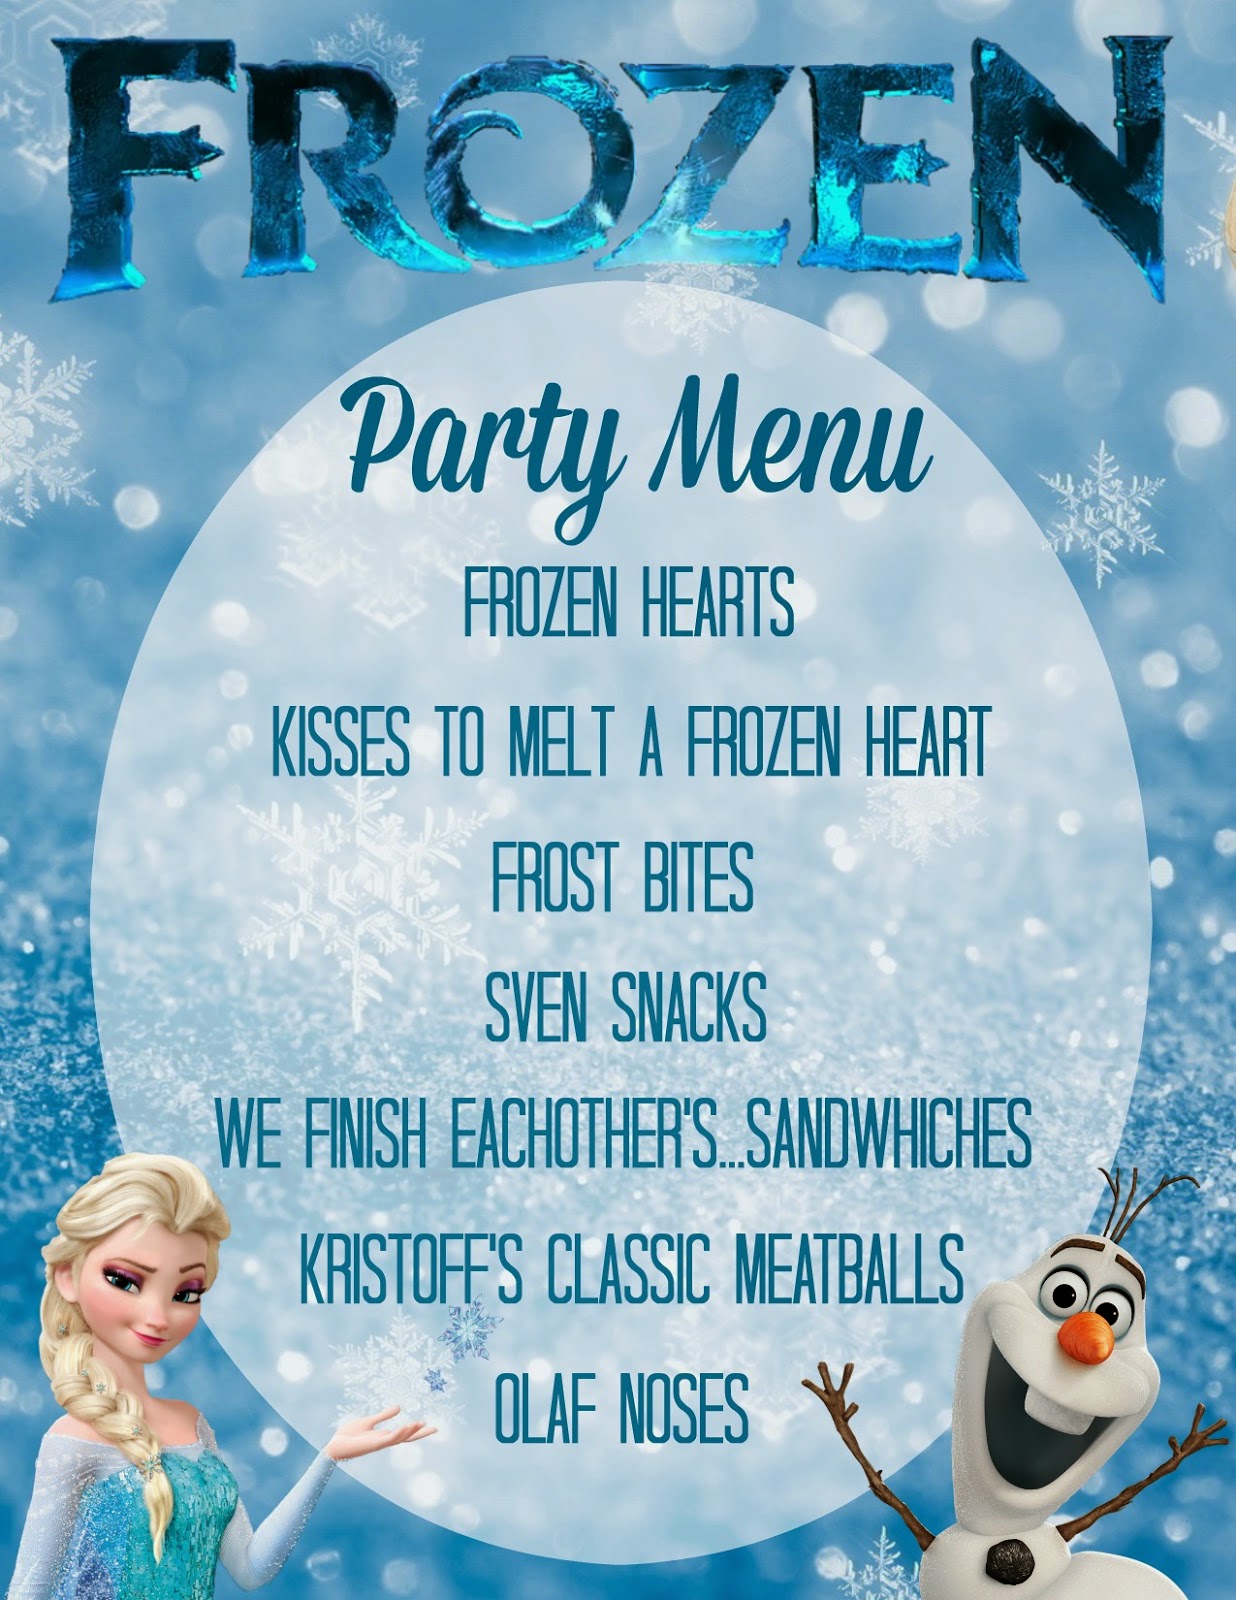 FREE Frozen Party Menu download + Party Ideas and Inspiration